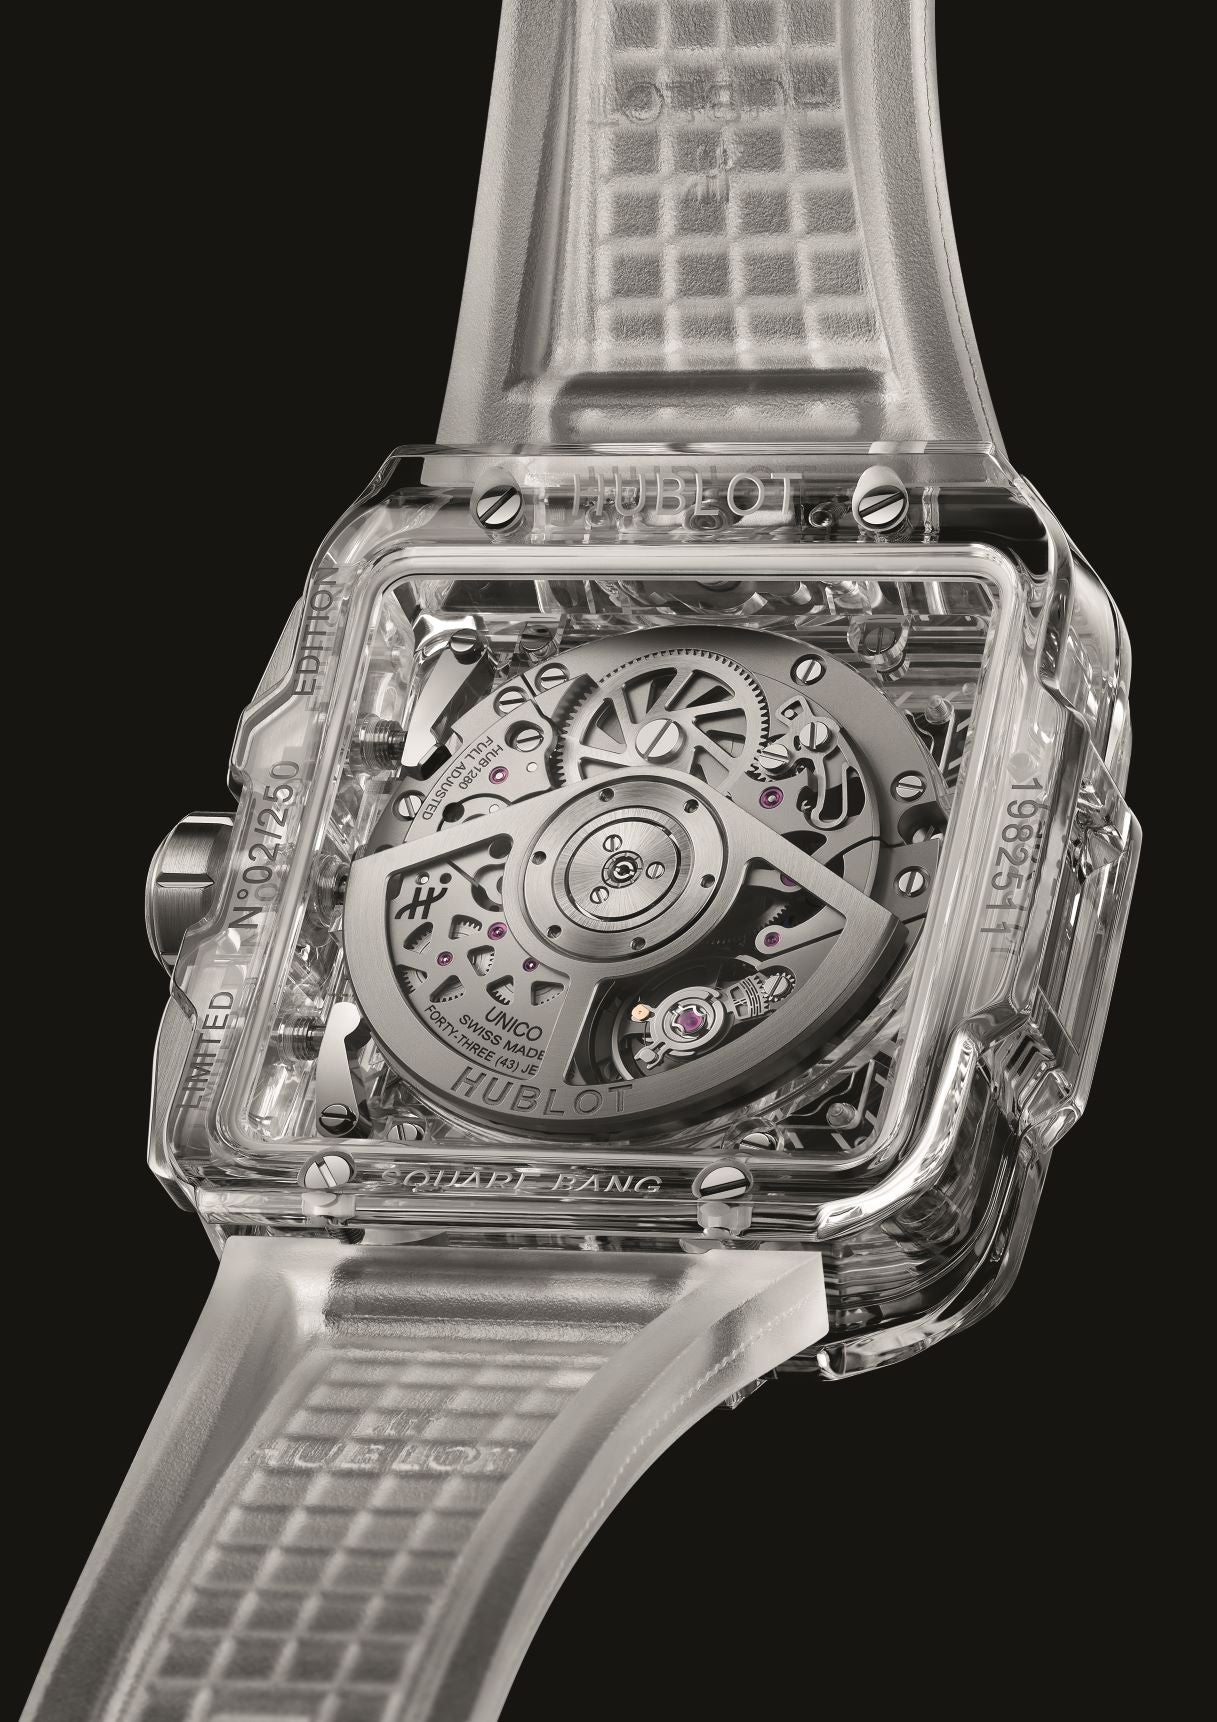 Hublot Square Bang Ceramic Watches In Black And White For 2023